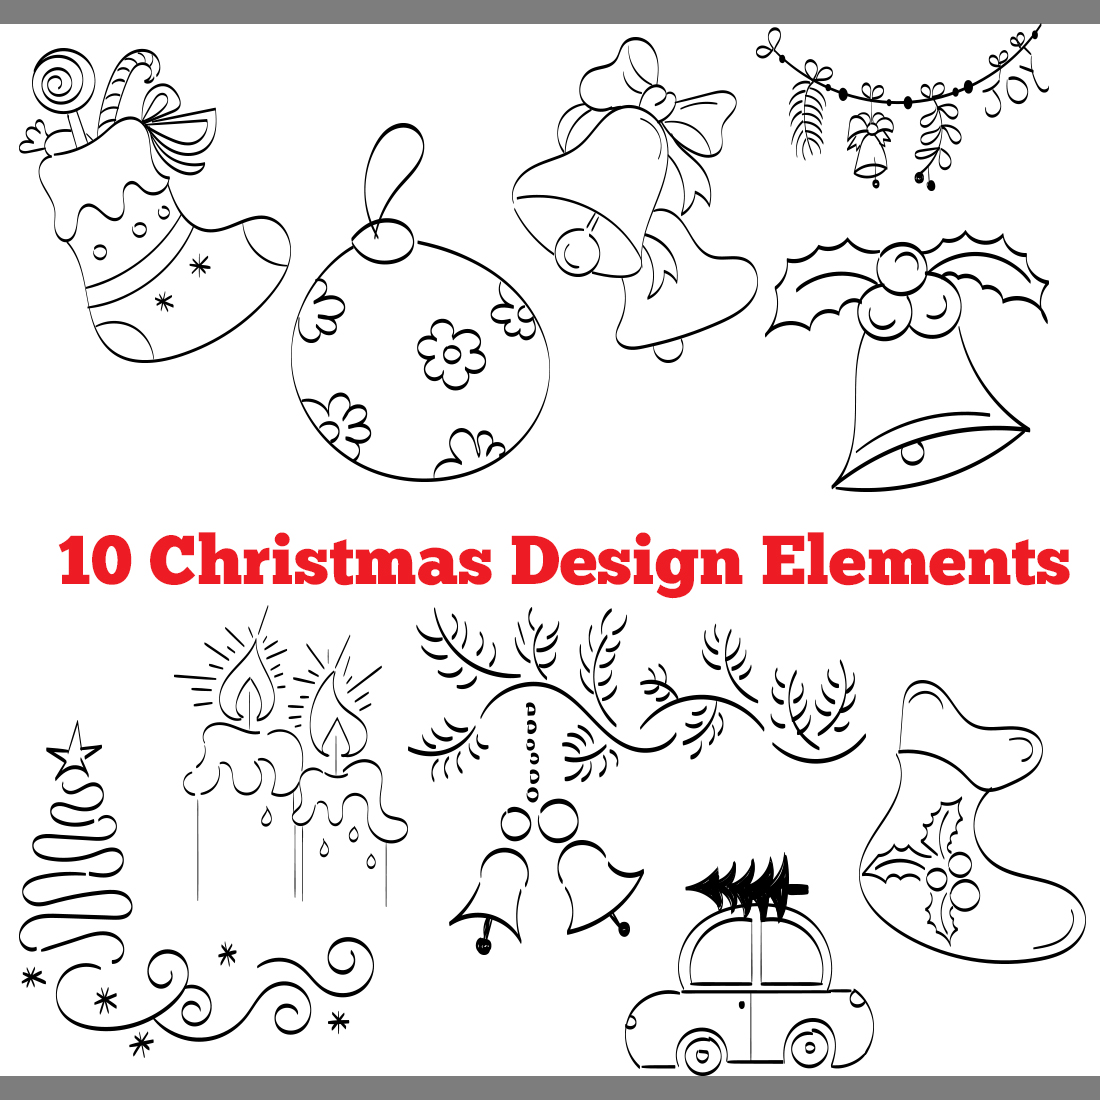 10 Christmas Design Elements created by dorothyart.